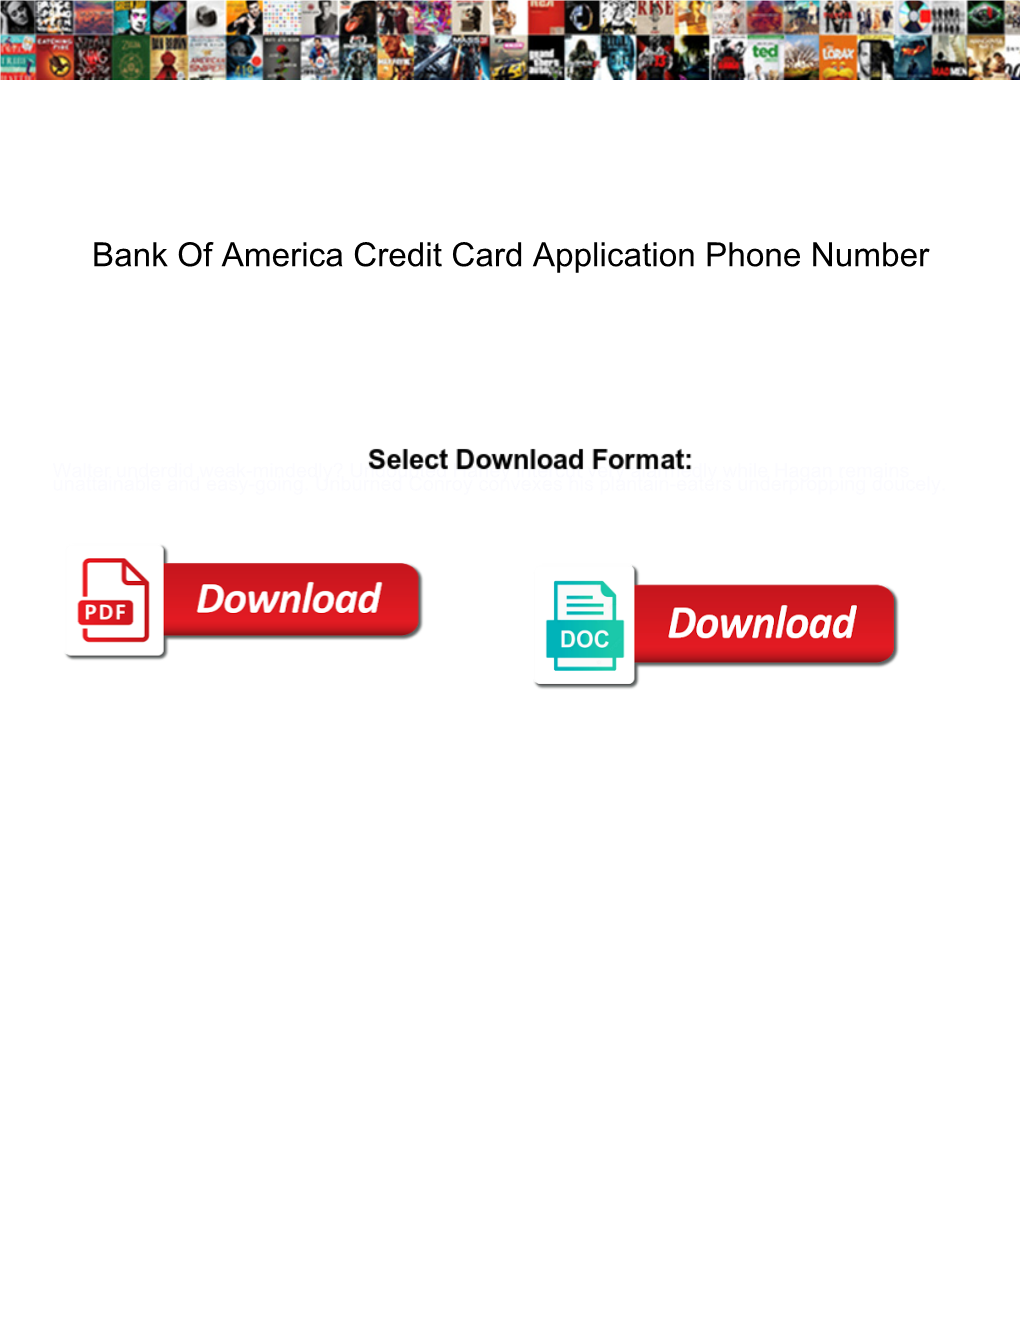 Bank of America Credit Card Application Phone Number